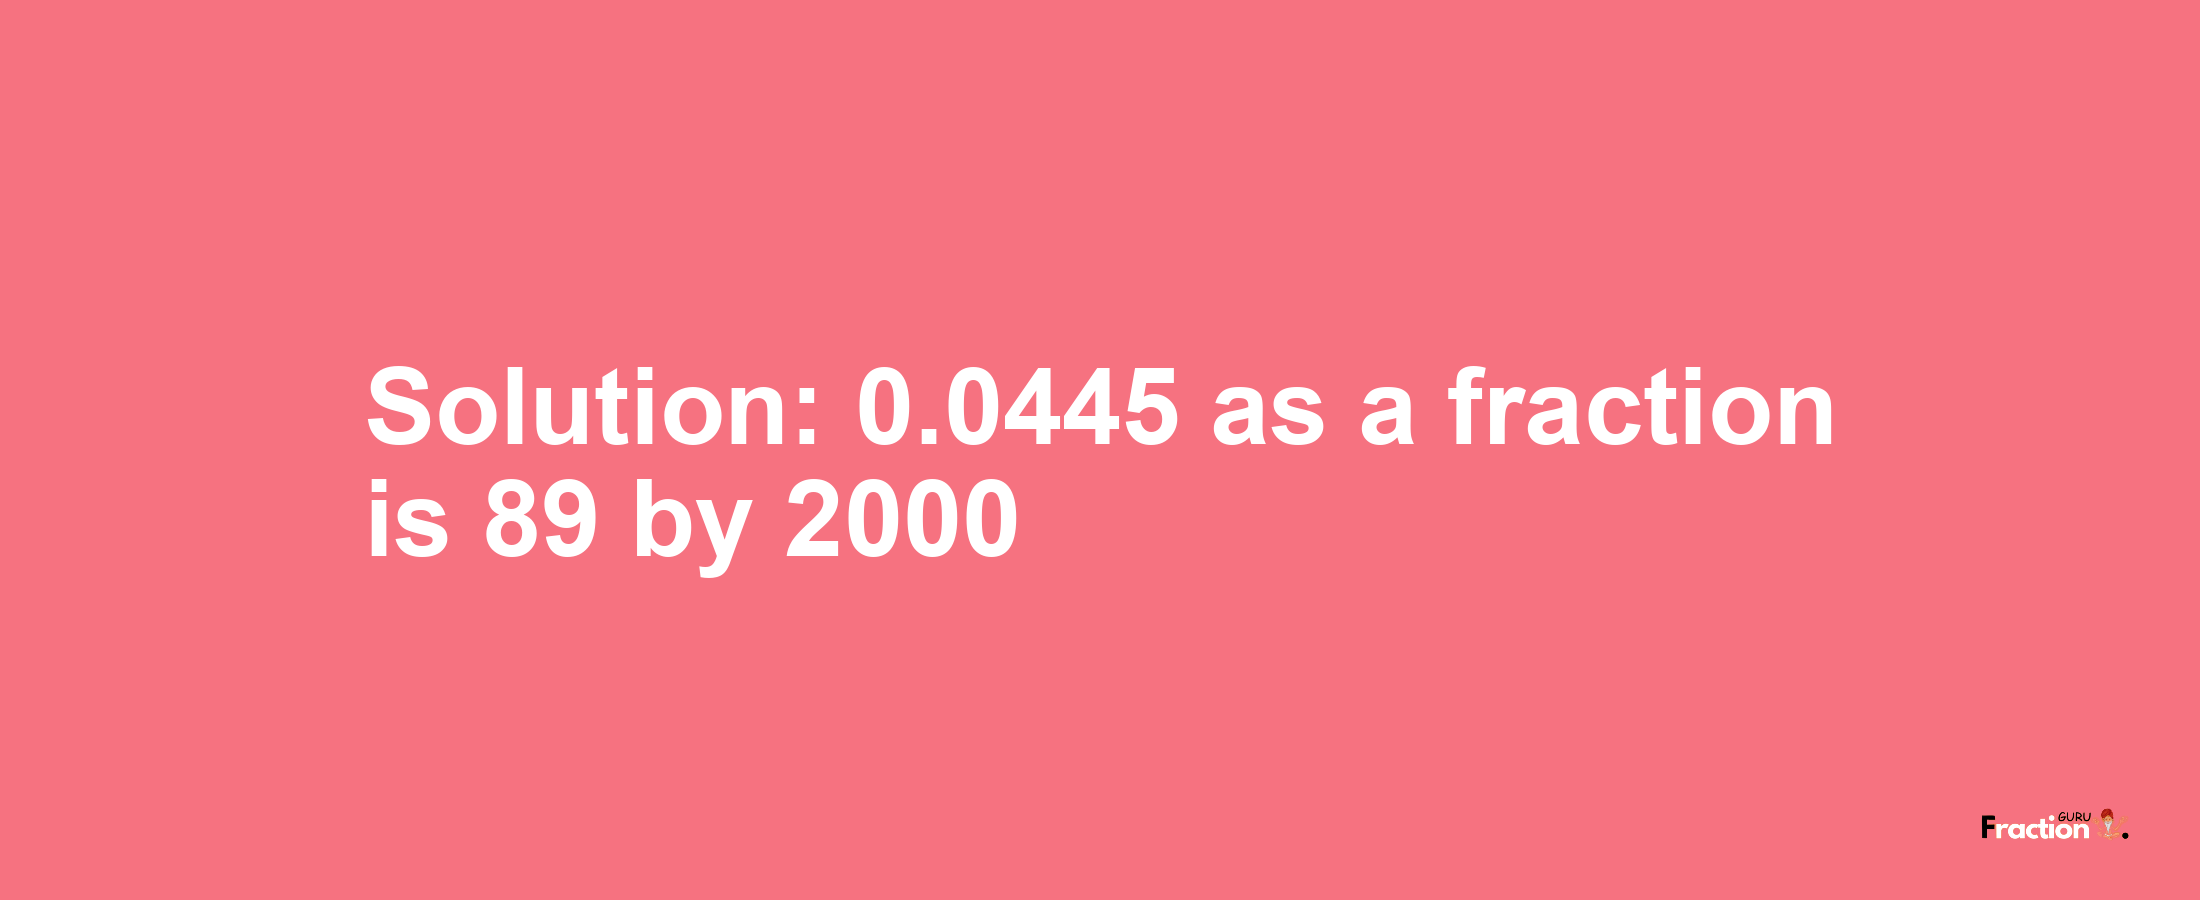 Solution:0.0445 as a fraction is 89/2000